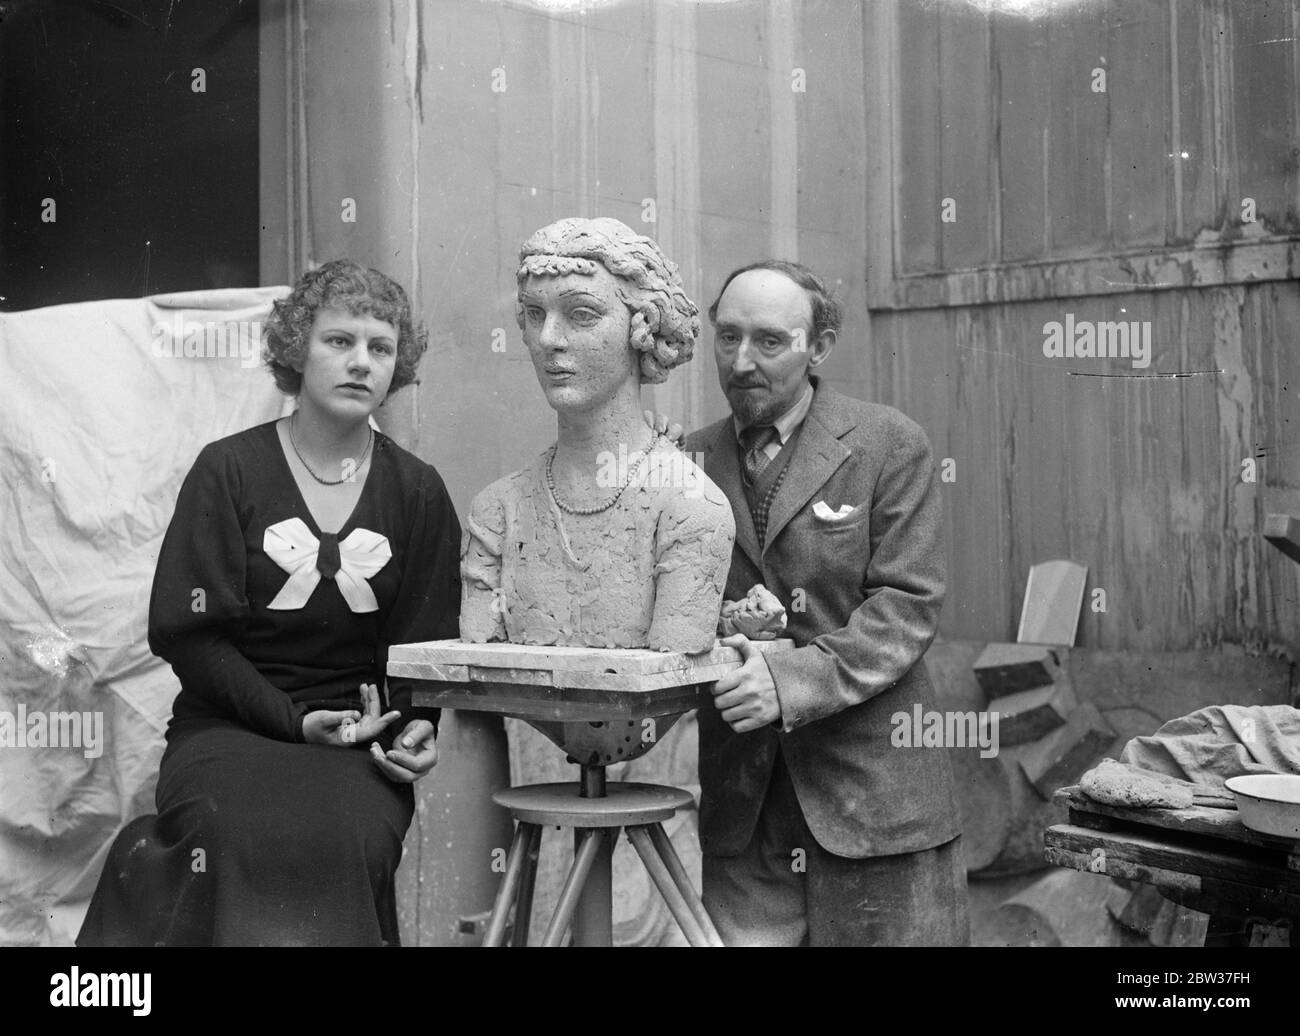 His finest work after six months of idleness . Described by the sculptor as the finest work he has ever done , Mr Frank Dobson is at work on o a portrait bust of Miss Peggy Salaman , the famous airwoman , at his London studio . this is the first work Mr Dobson has attempted since he left hospital where for six months he received treatment for a broken shoulder . He is wondering if the enforced idleness has enabled him to surpass his previous artistic efforts . Miss Salaman holds the record for a flight over the Empire route from England to the Cape . Photo shows , Miss Peggy Salaman sitting to Stock Photo